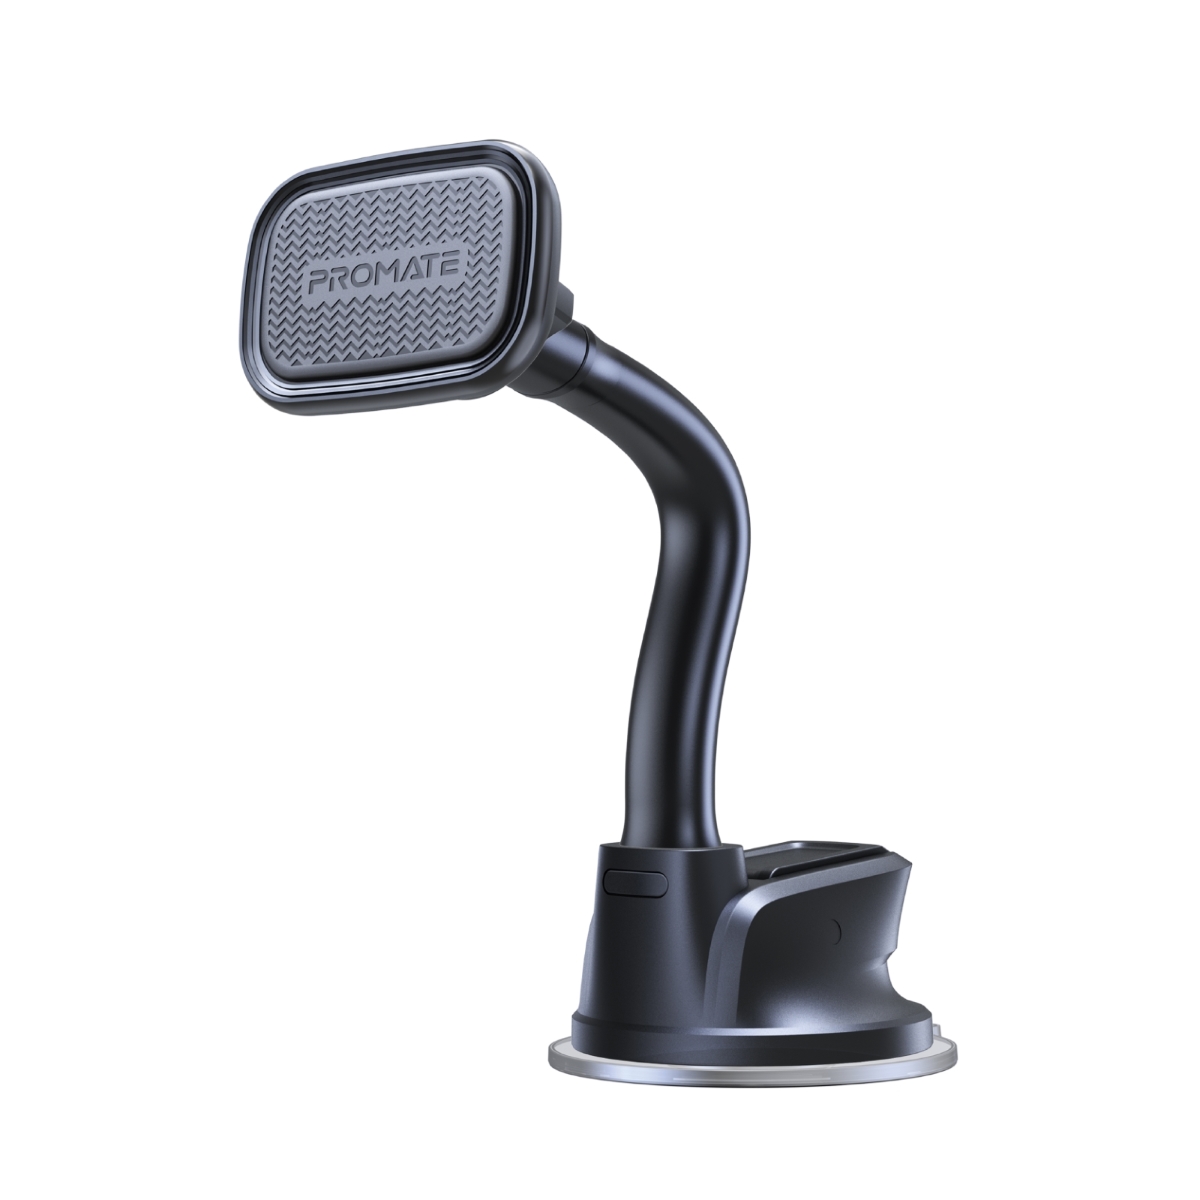 Promate Car Phone Mount with 360 Degree Design, N52 Powerful Magnet and Slip-Proof Surface, MagMount-L